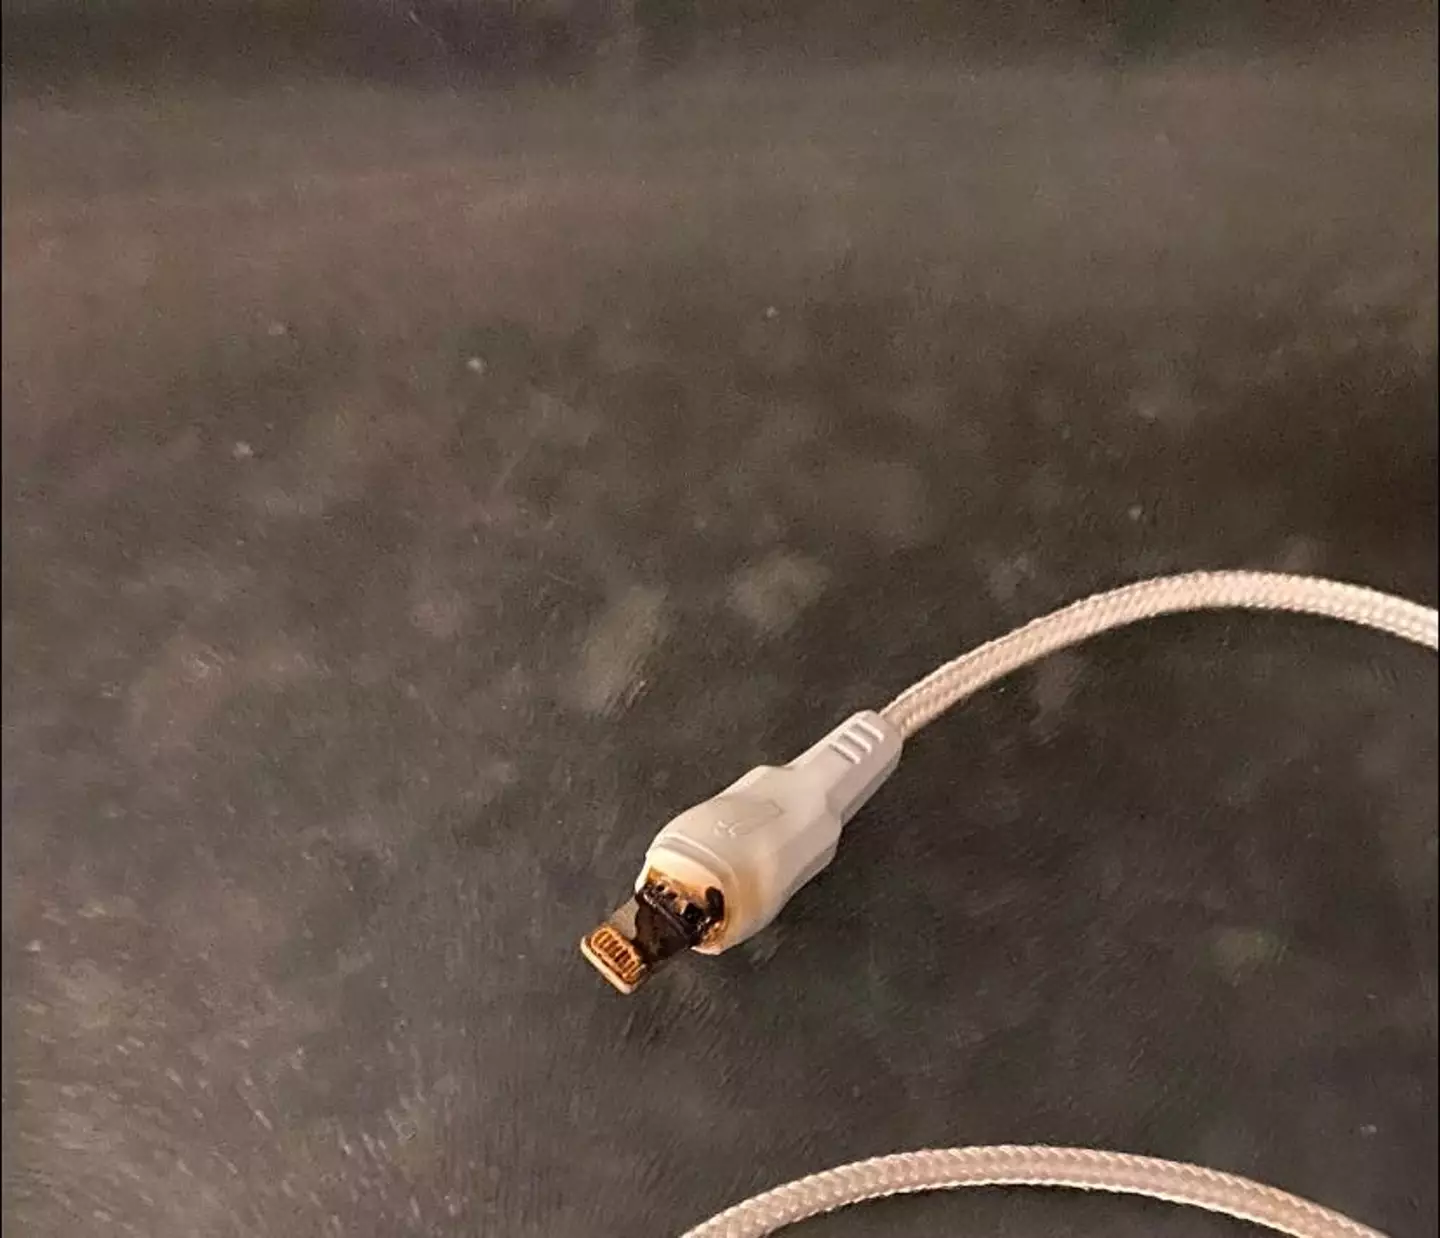 A mum issued a stark warning after her cheap charger started to burn.